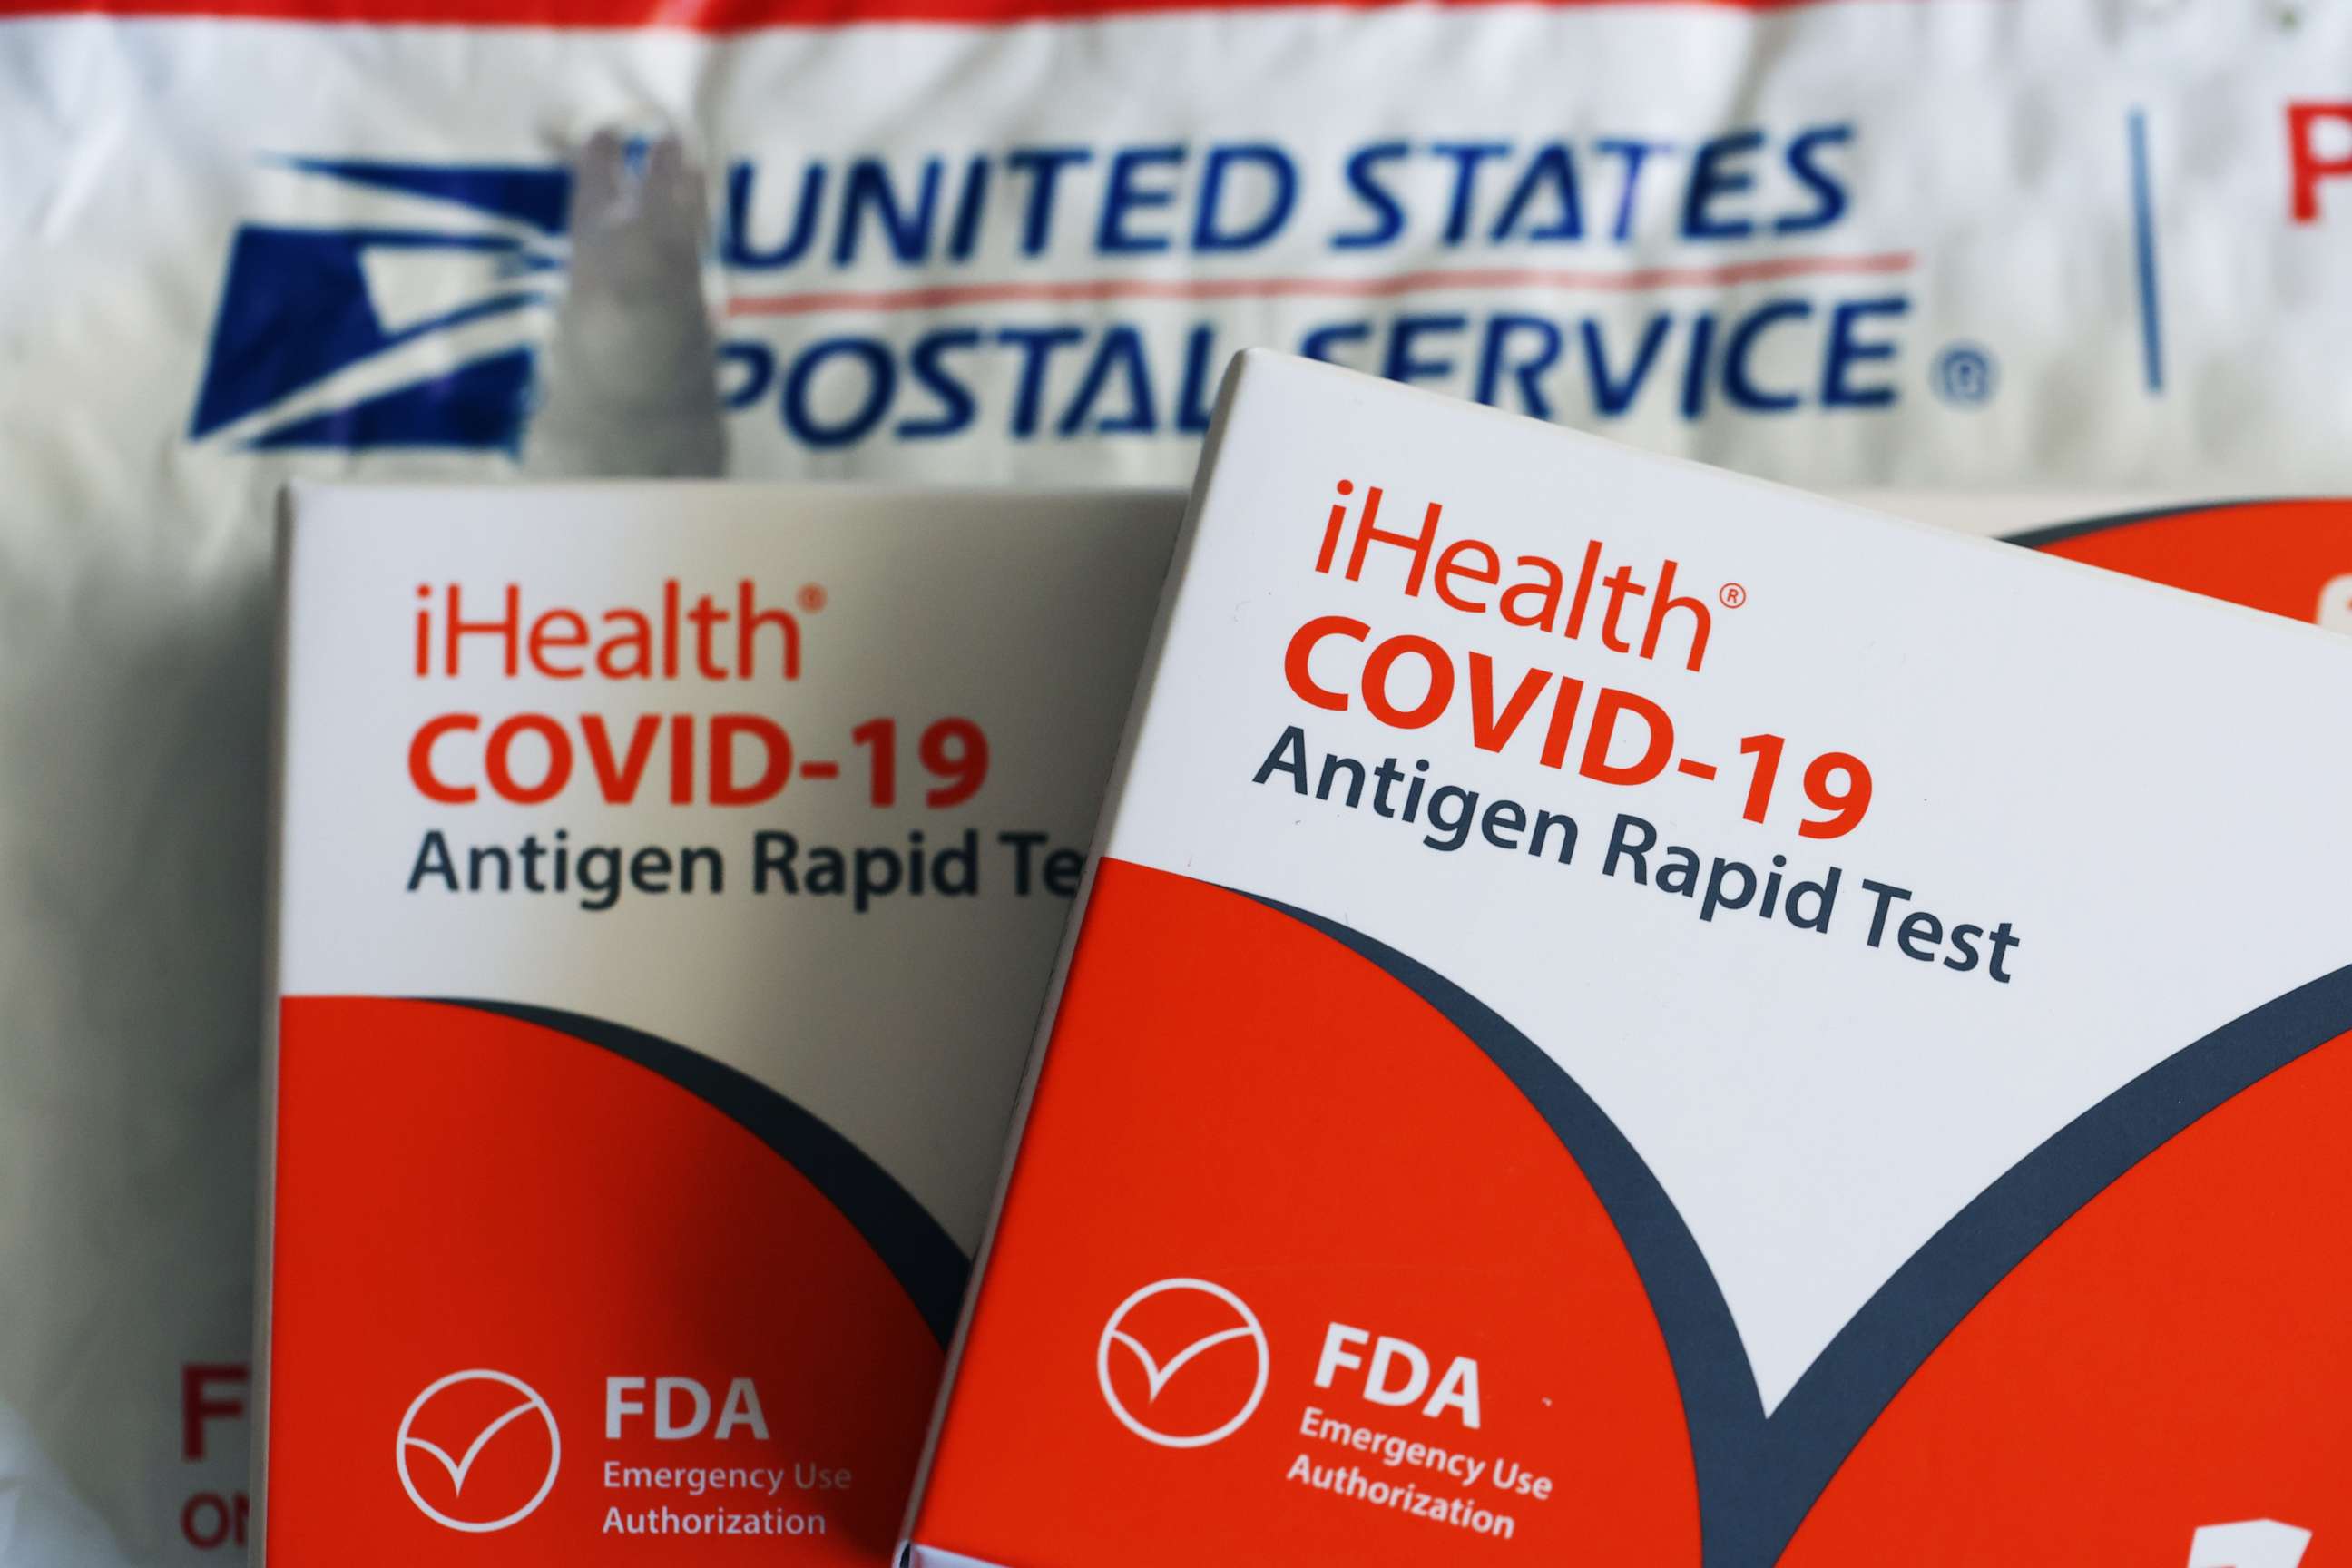 PHOTO: Free iHealth COVID-19 antigen rapid tests from the federal government sit on a U.S. Postal Service envelope after being delivered on Feb. 04, 2022 in San Anselmo, Calif.